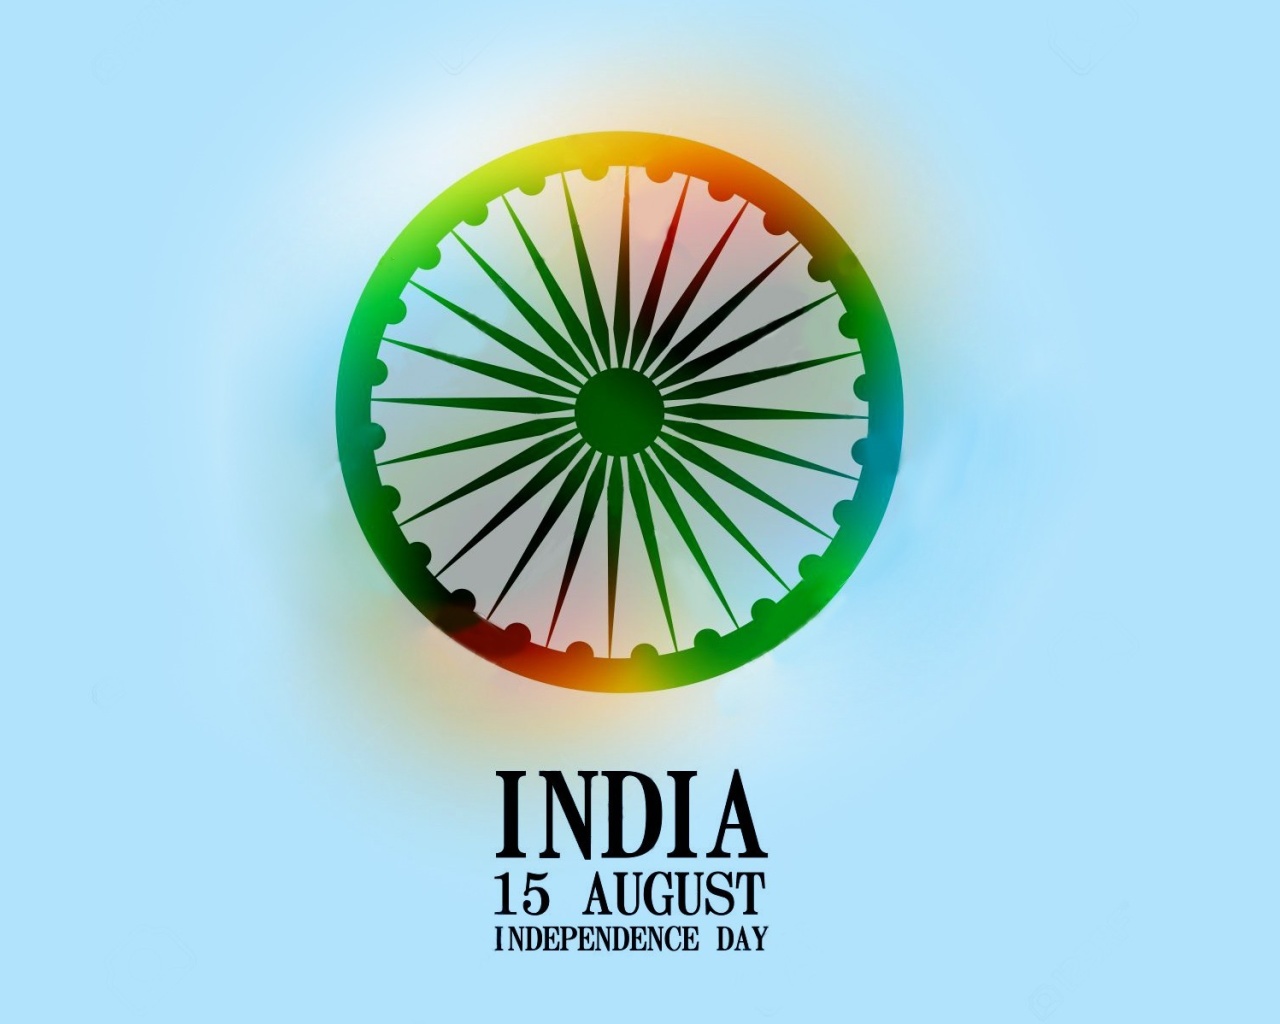 India Independence Day 15 August wallpaper 1280x1024